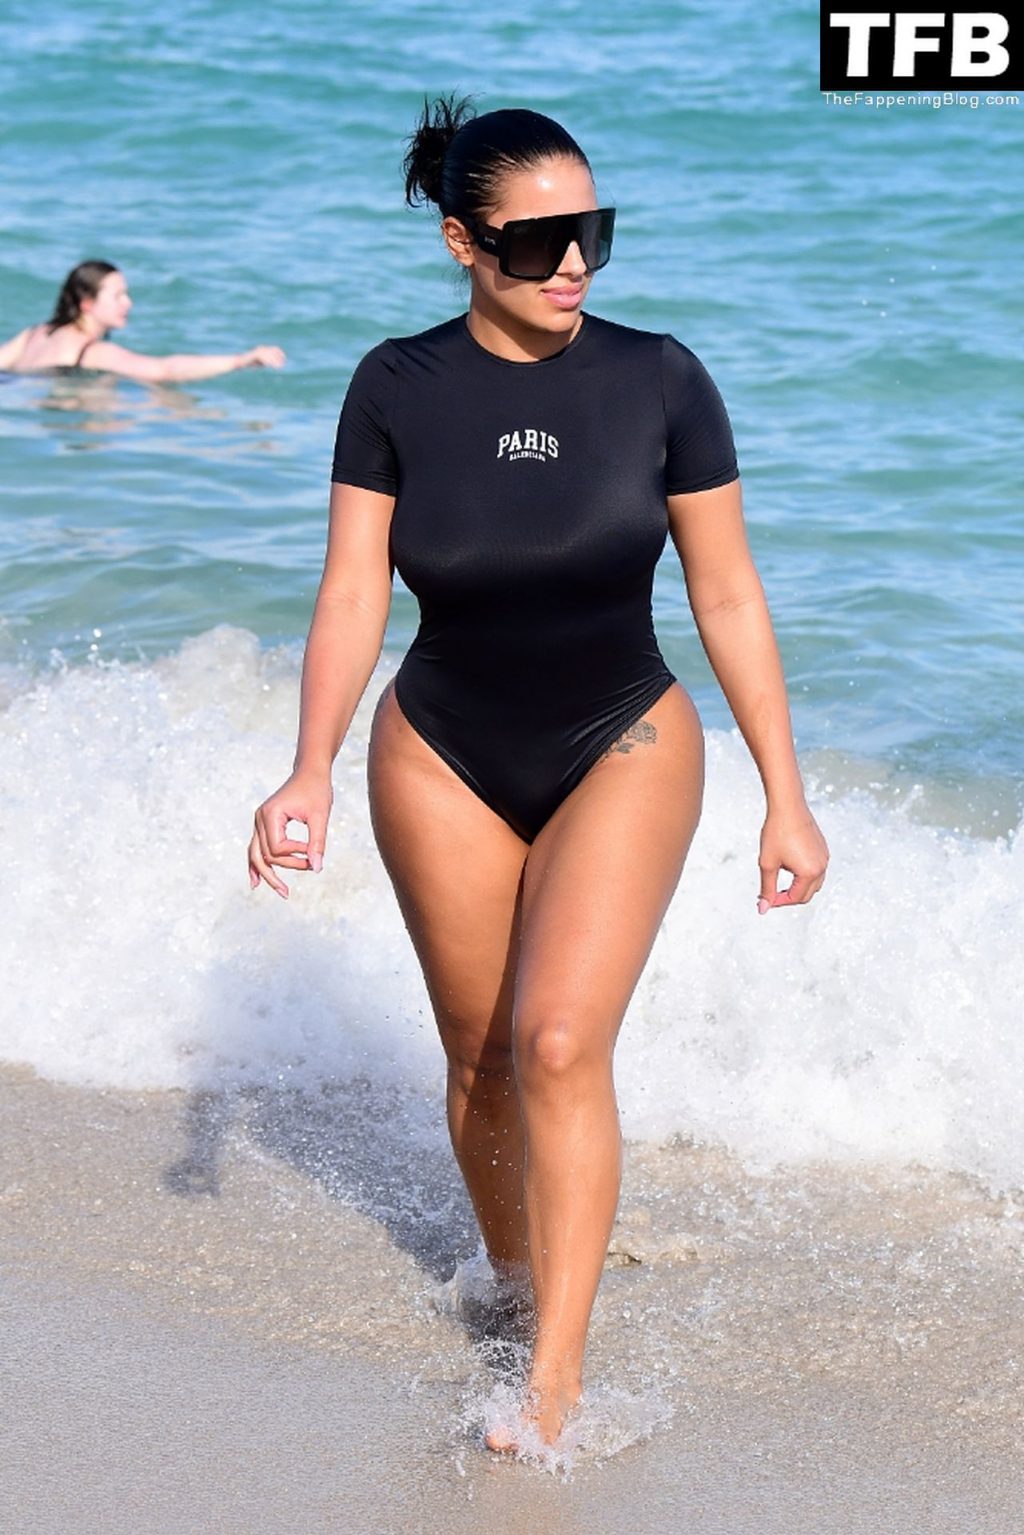 Chaney Jones Shows Off Her Curves on The Beach (24 Photos)